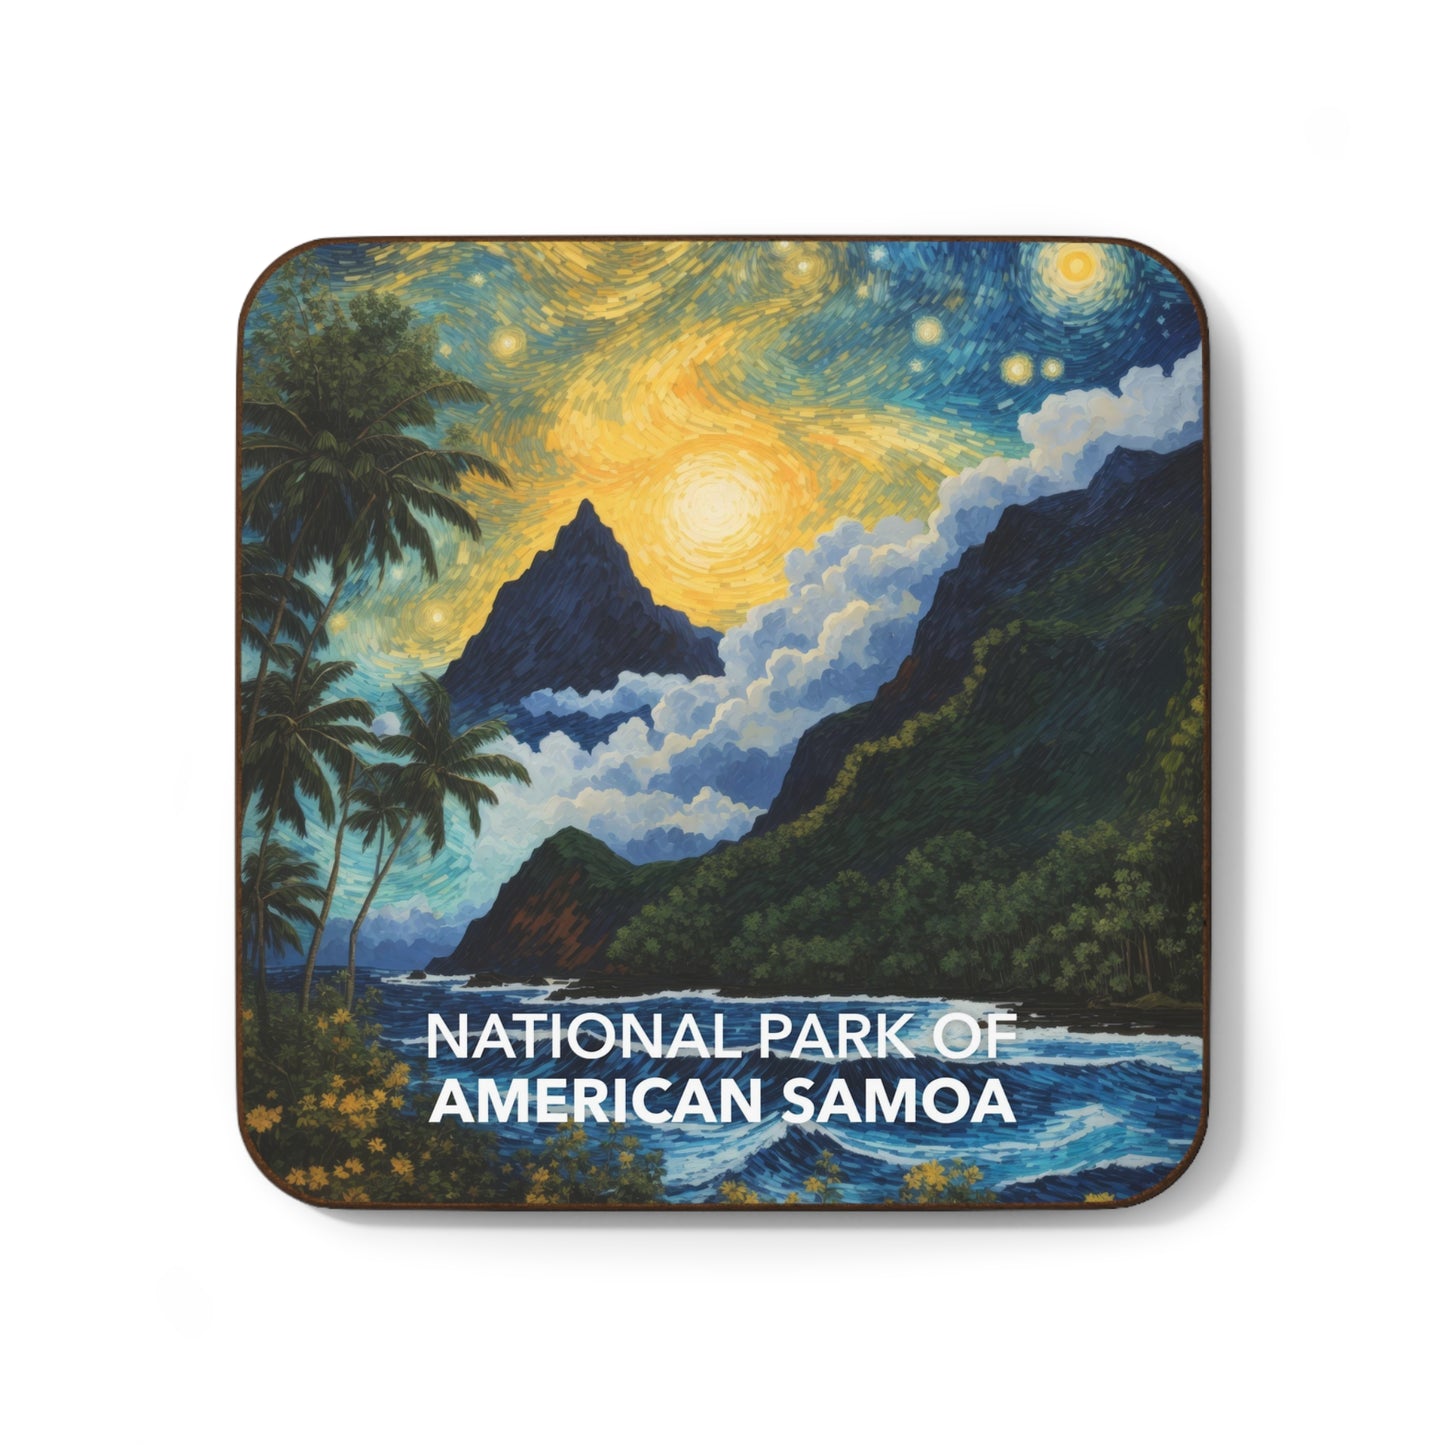 National Park of American Samoa Coaster - The Starry Night